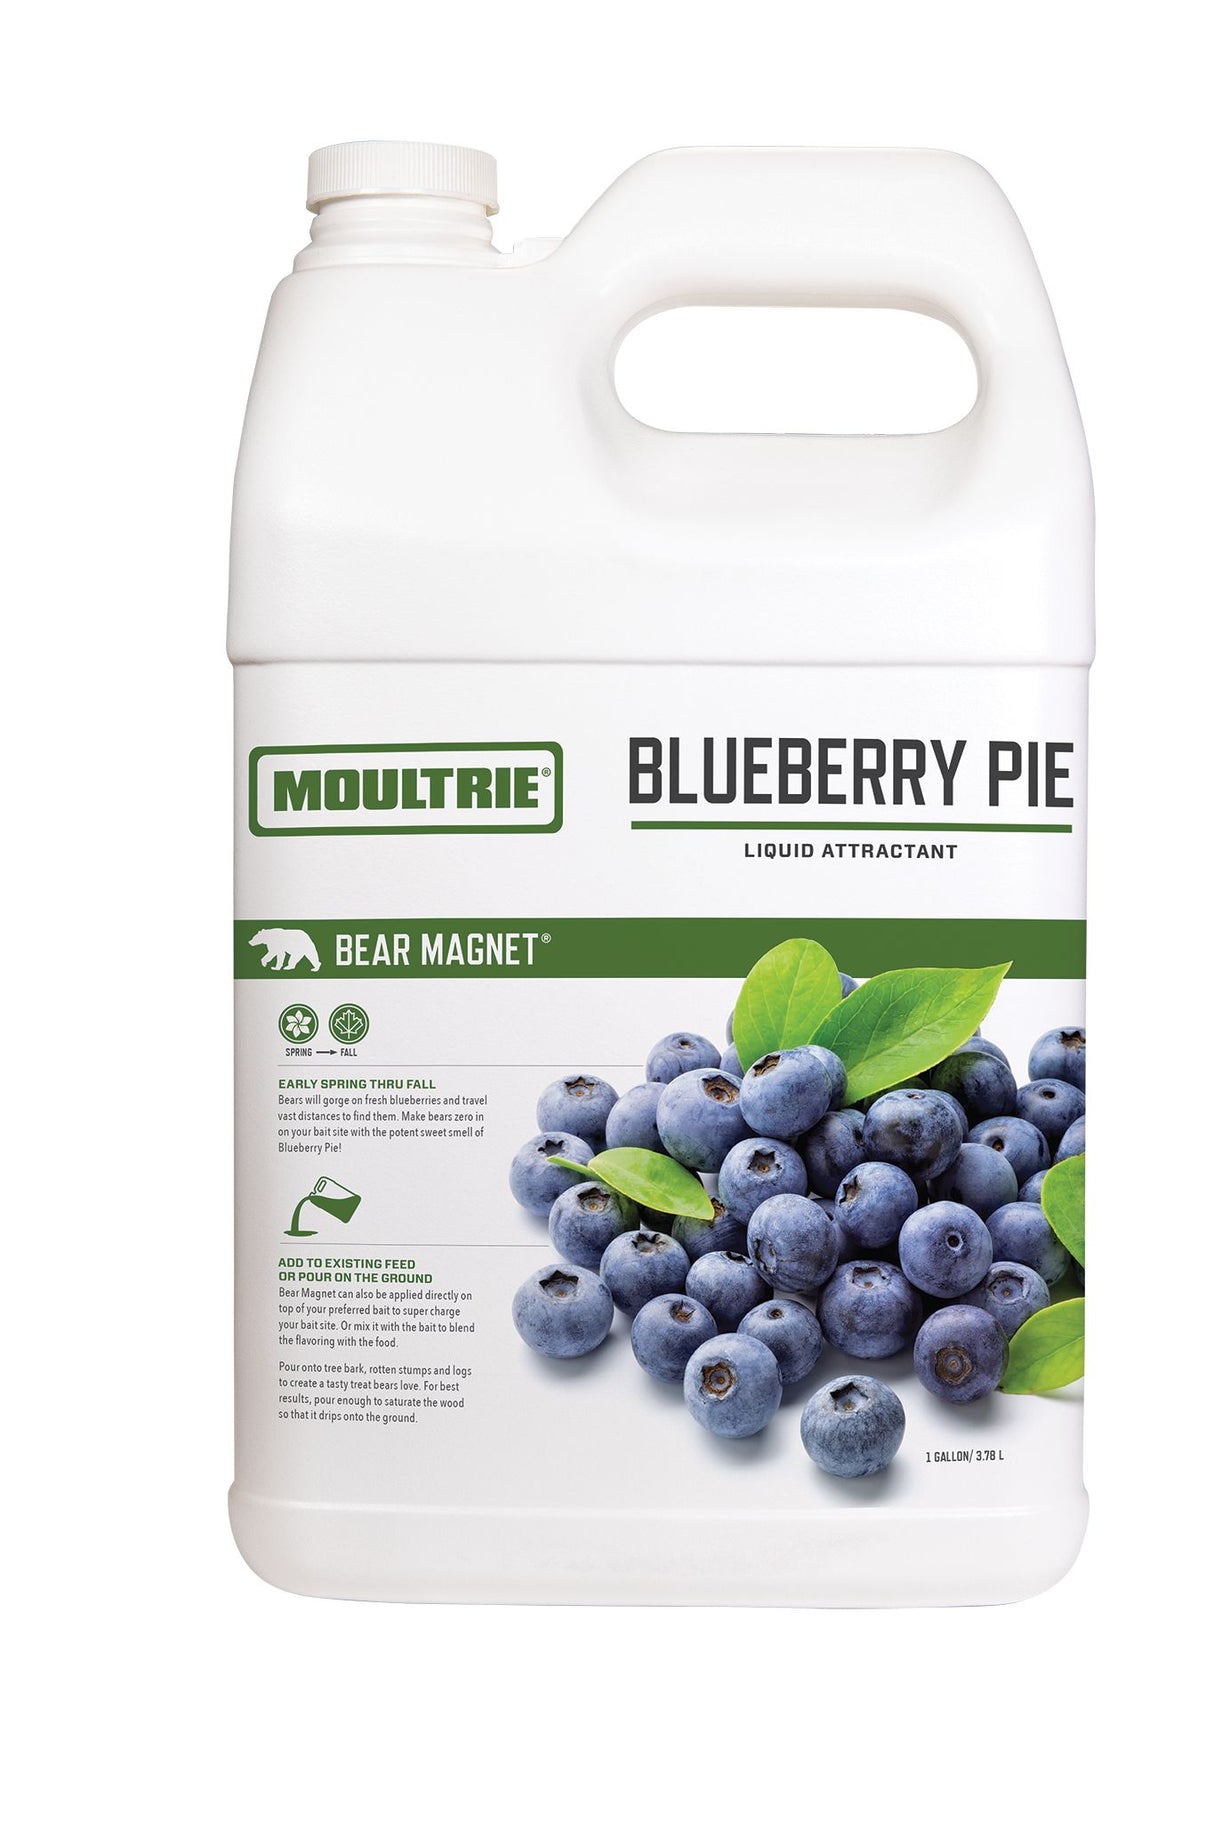 Moultrie Bear Magnet Blueberry Pie